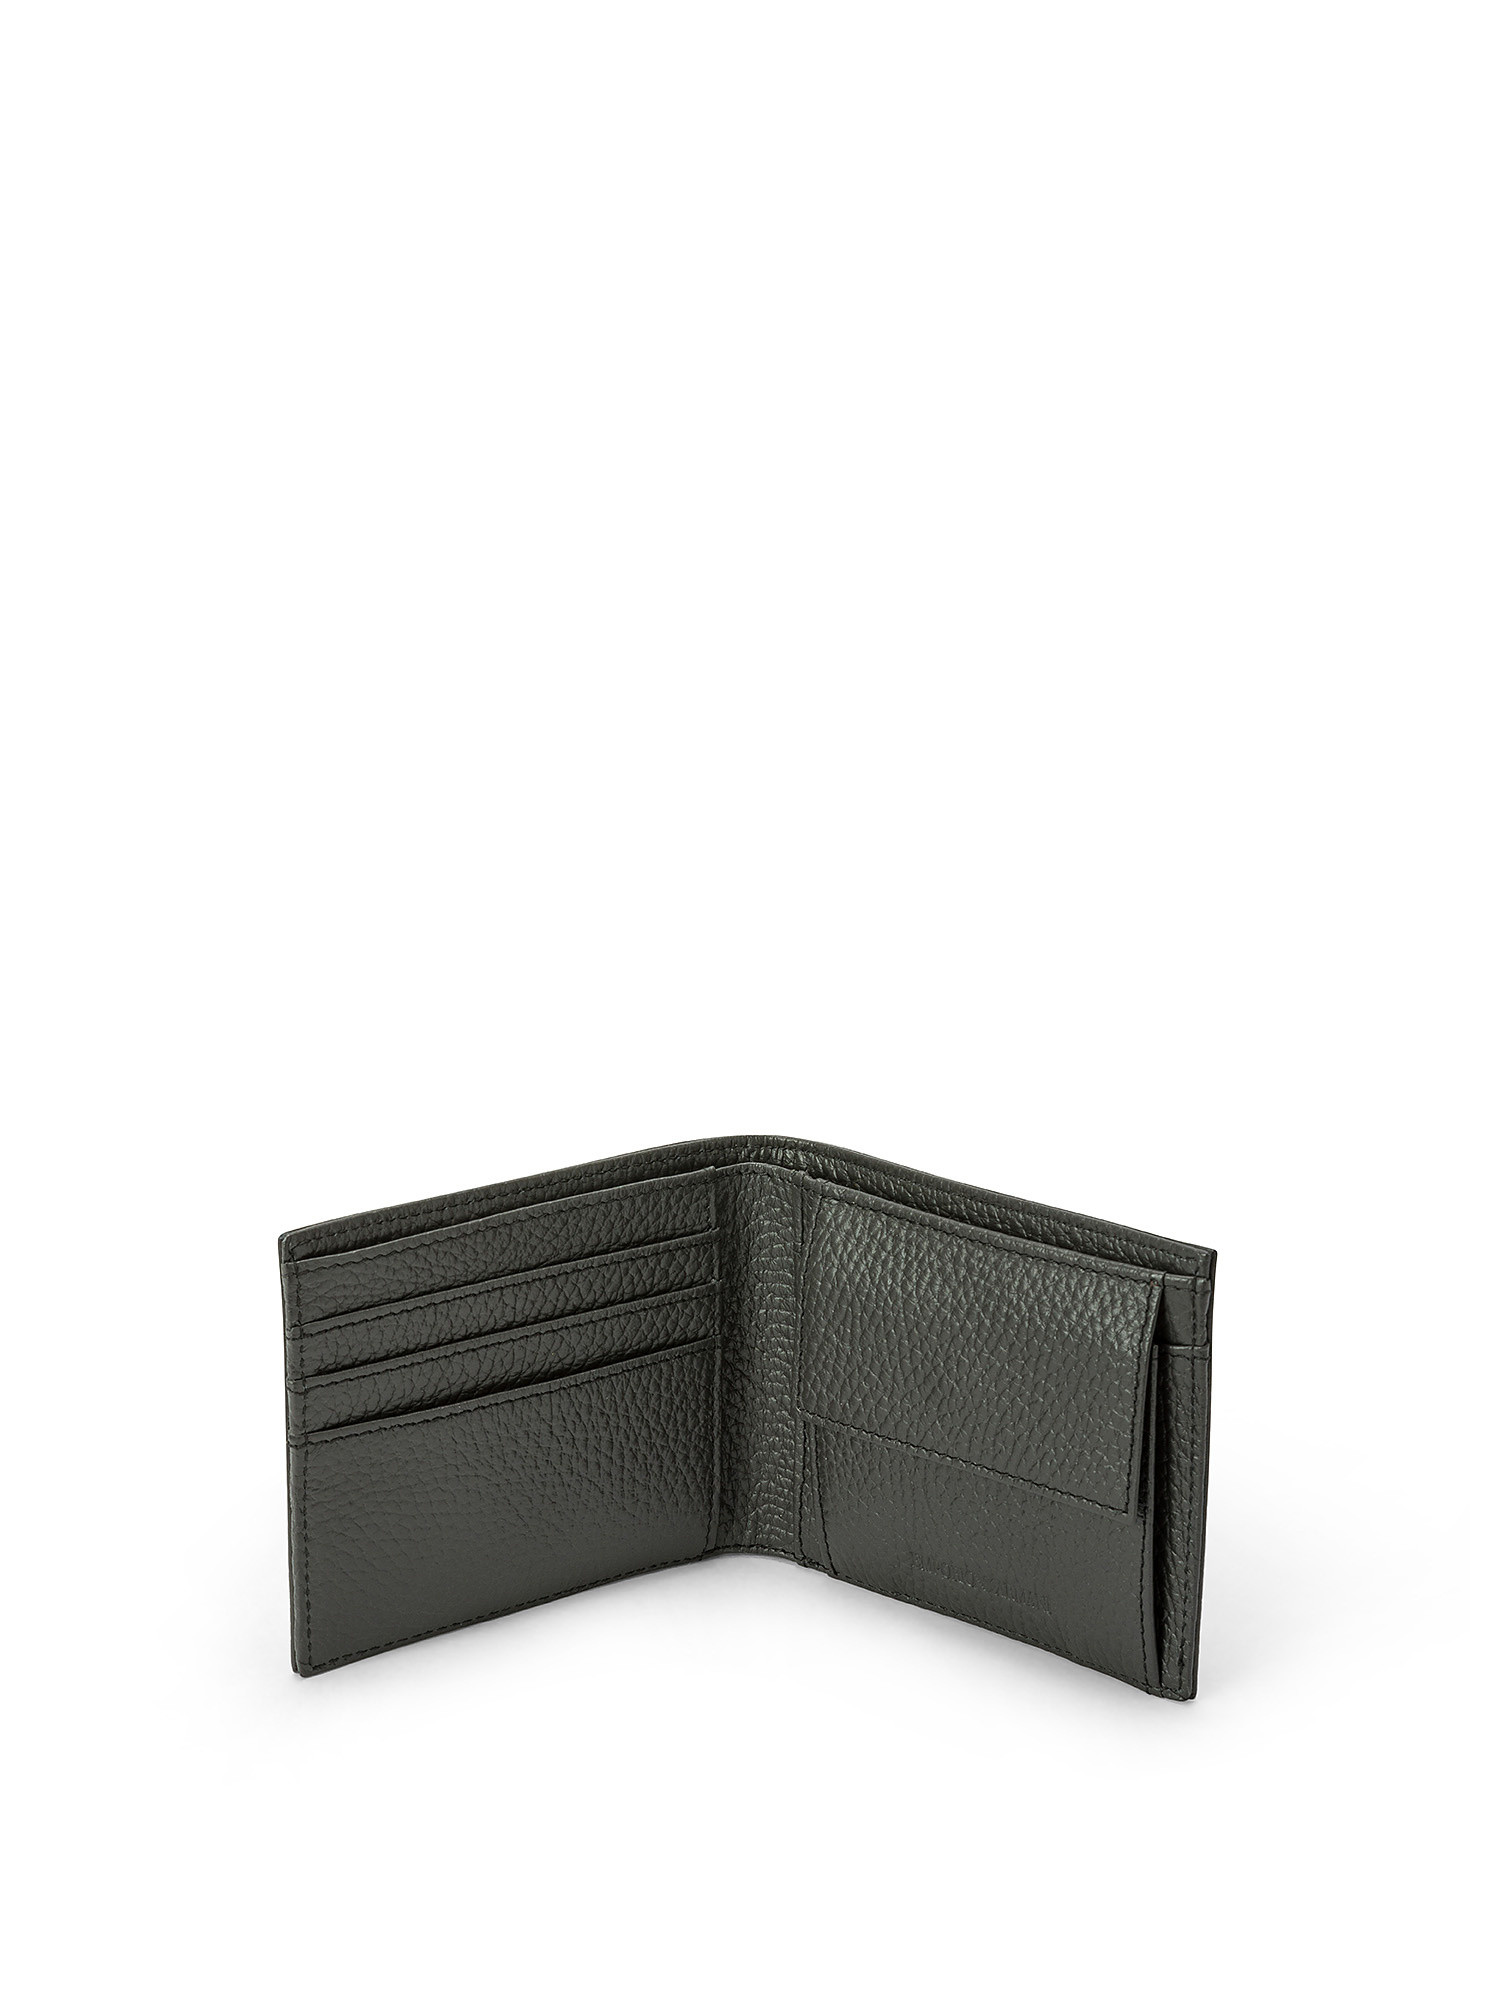 Emporio Armani - Wallet in tumbled leather with coin purse, Dark Grey, large image number 2